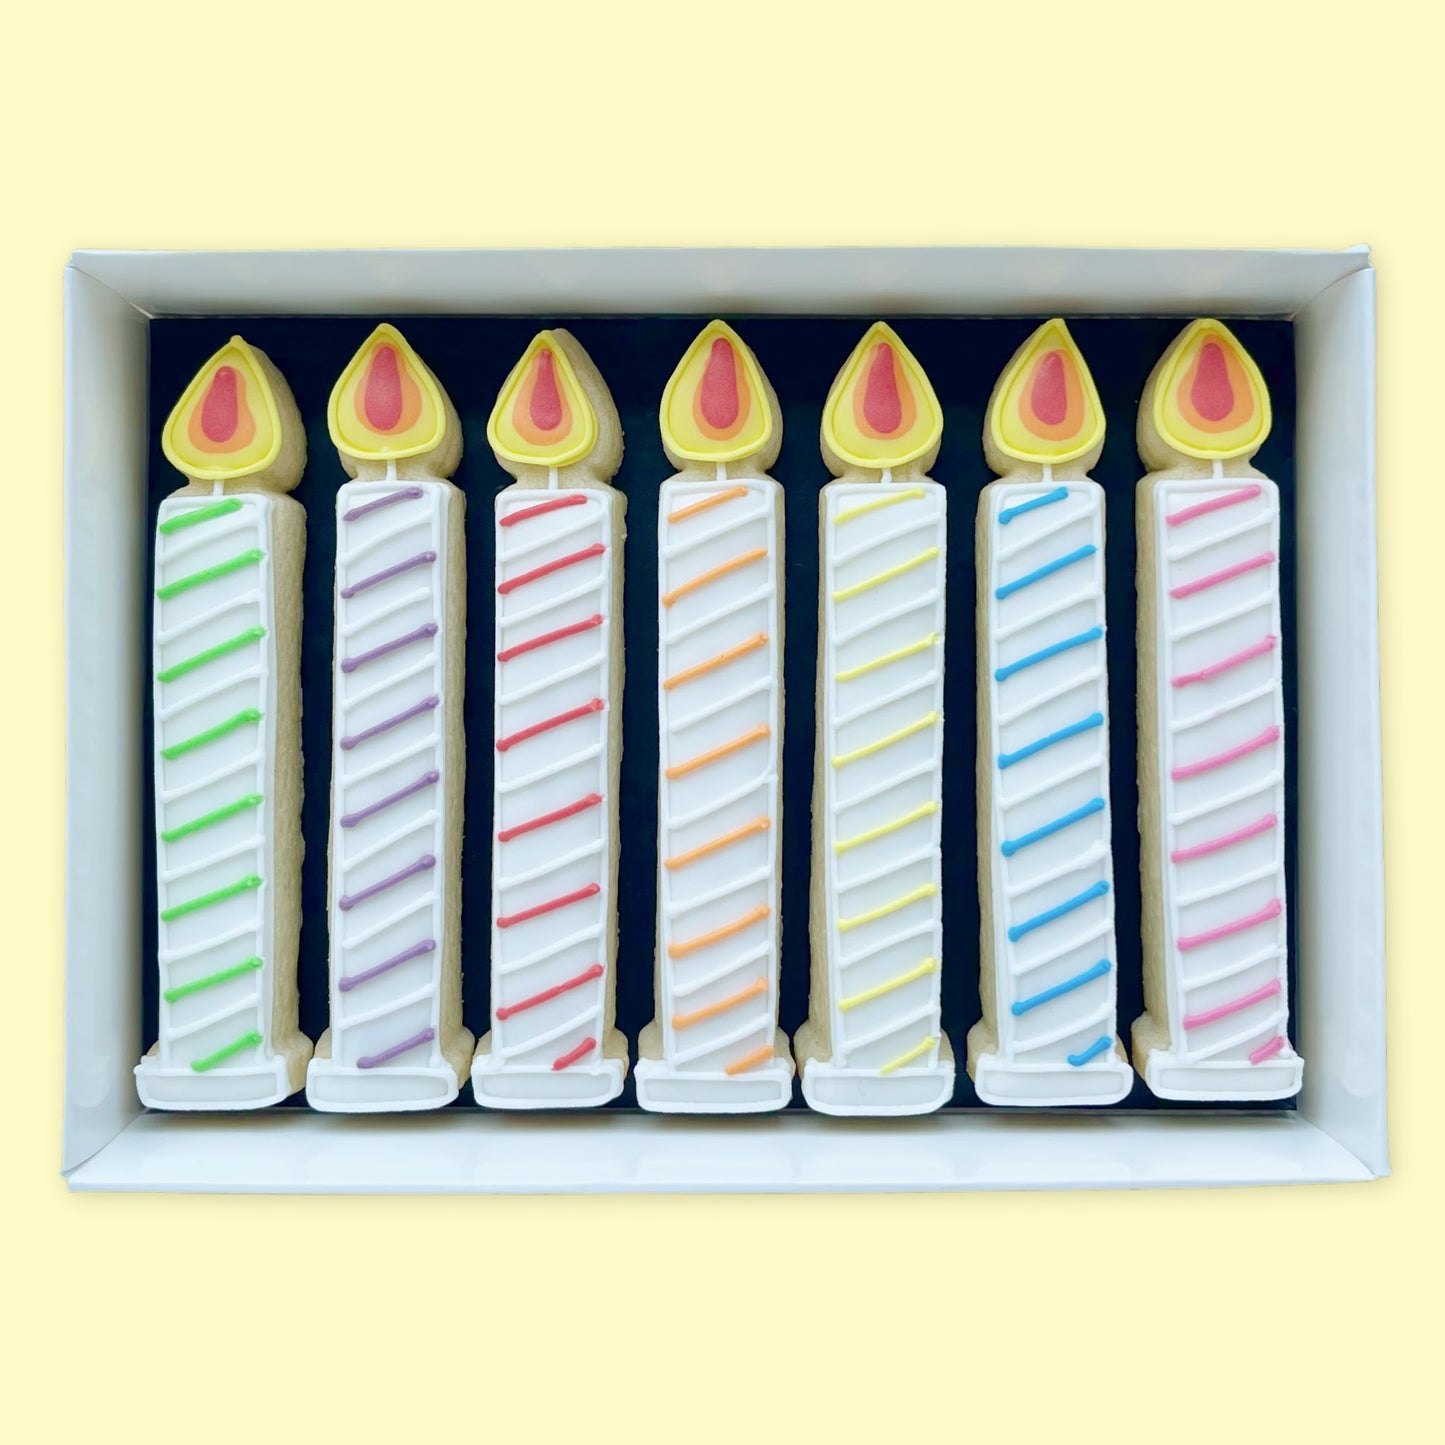 Hand iced birthday candles biscuits in rainbow shades in an open white gift box by Katie's biscuit shop